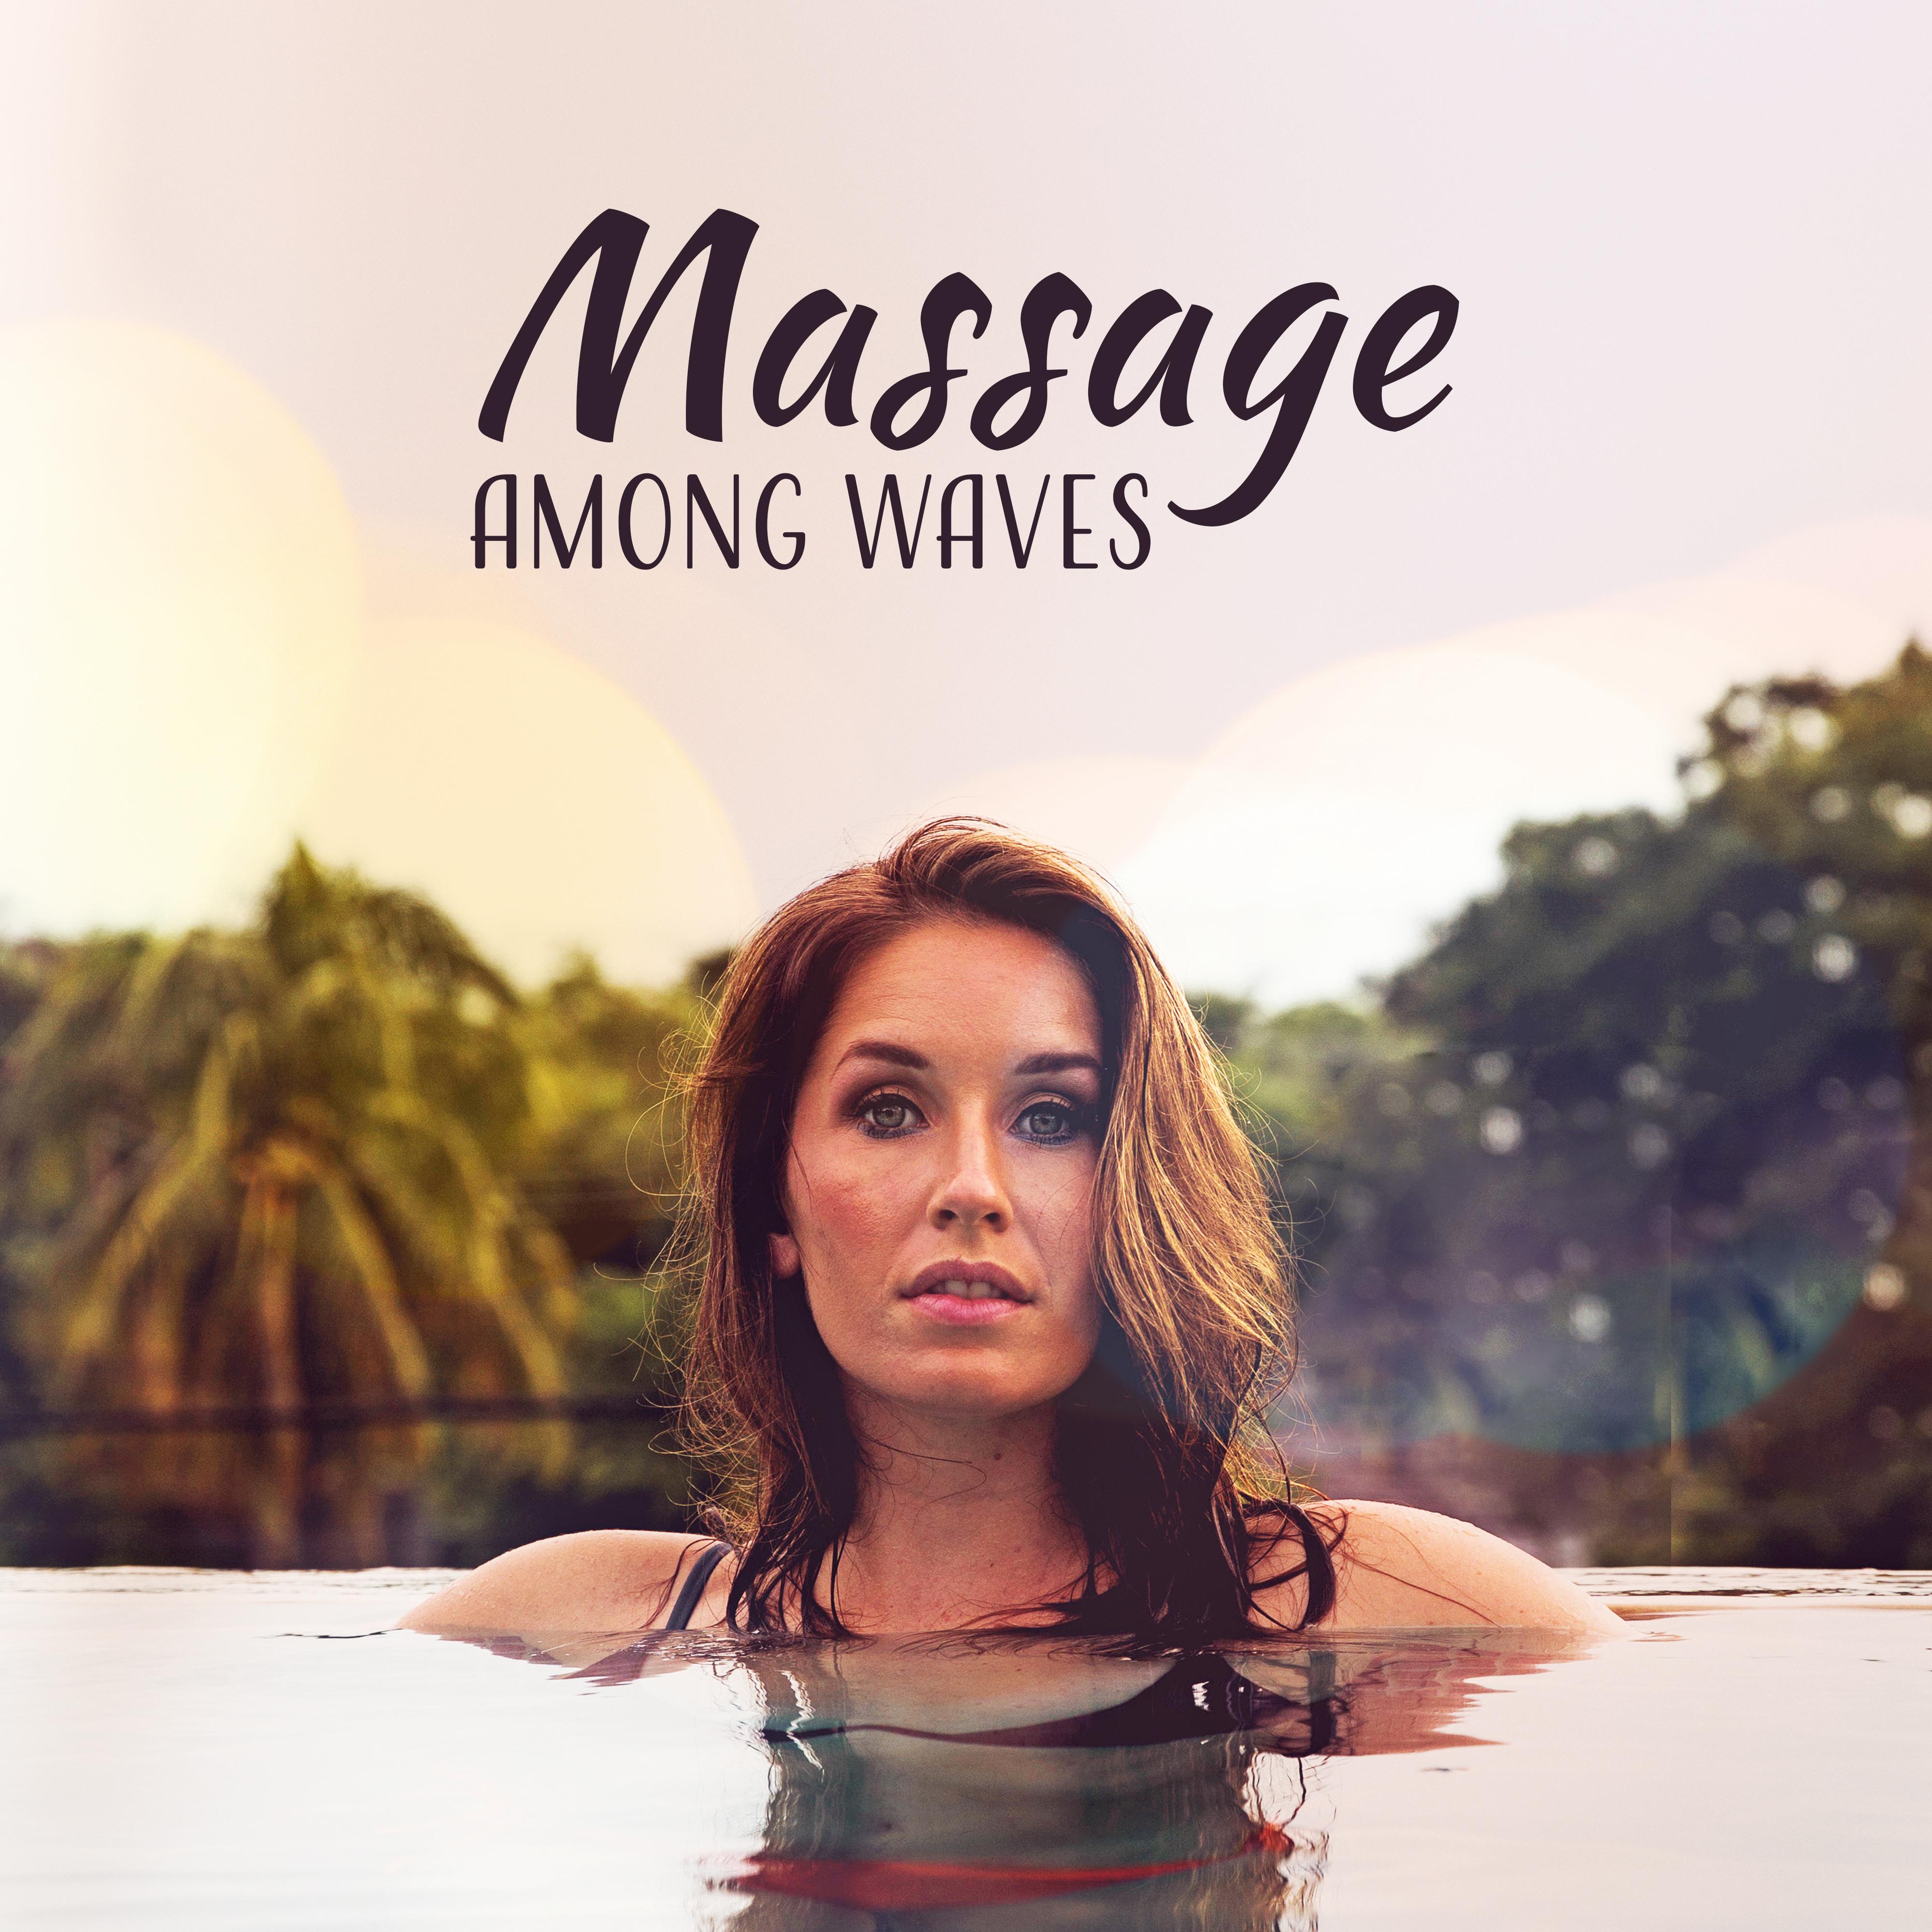 Massage Among Waves – Relaxing New Age, Music for Massage, Spa, Wellness Treatments, Relax